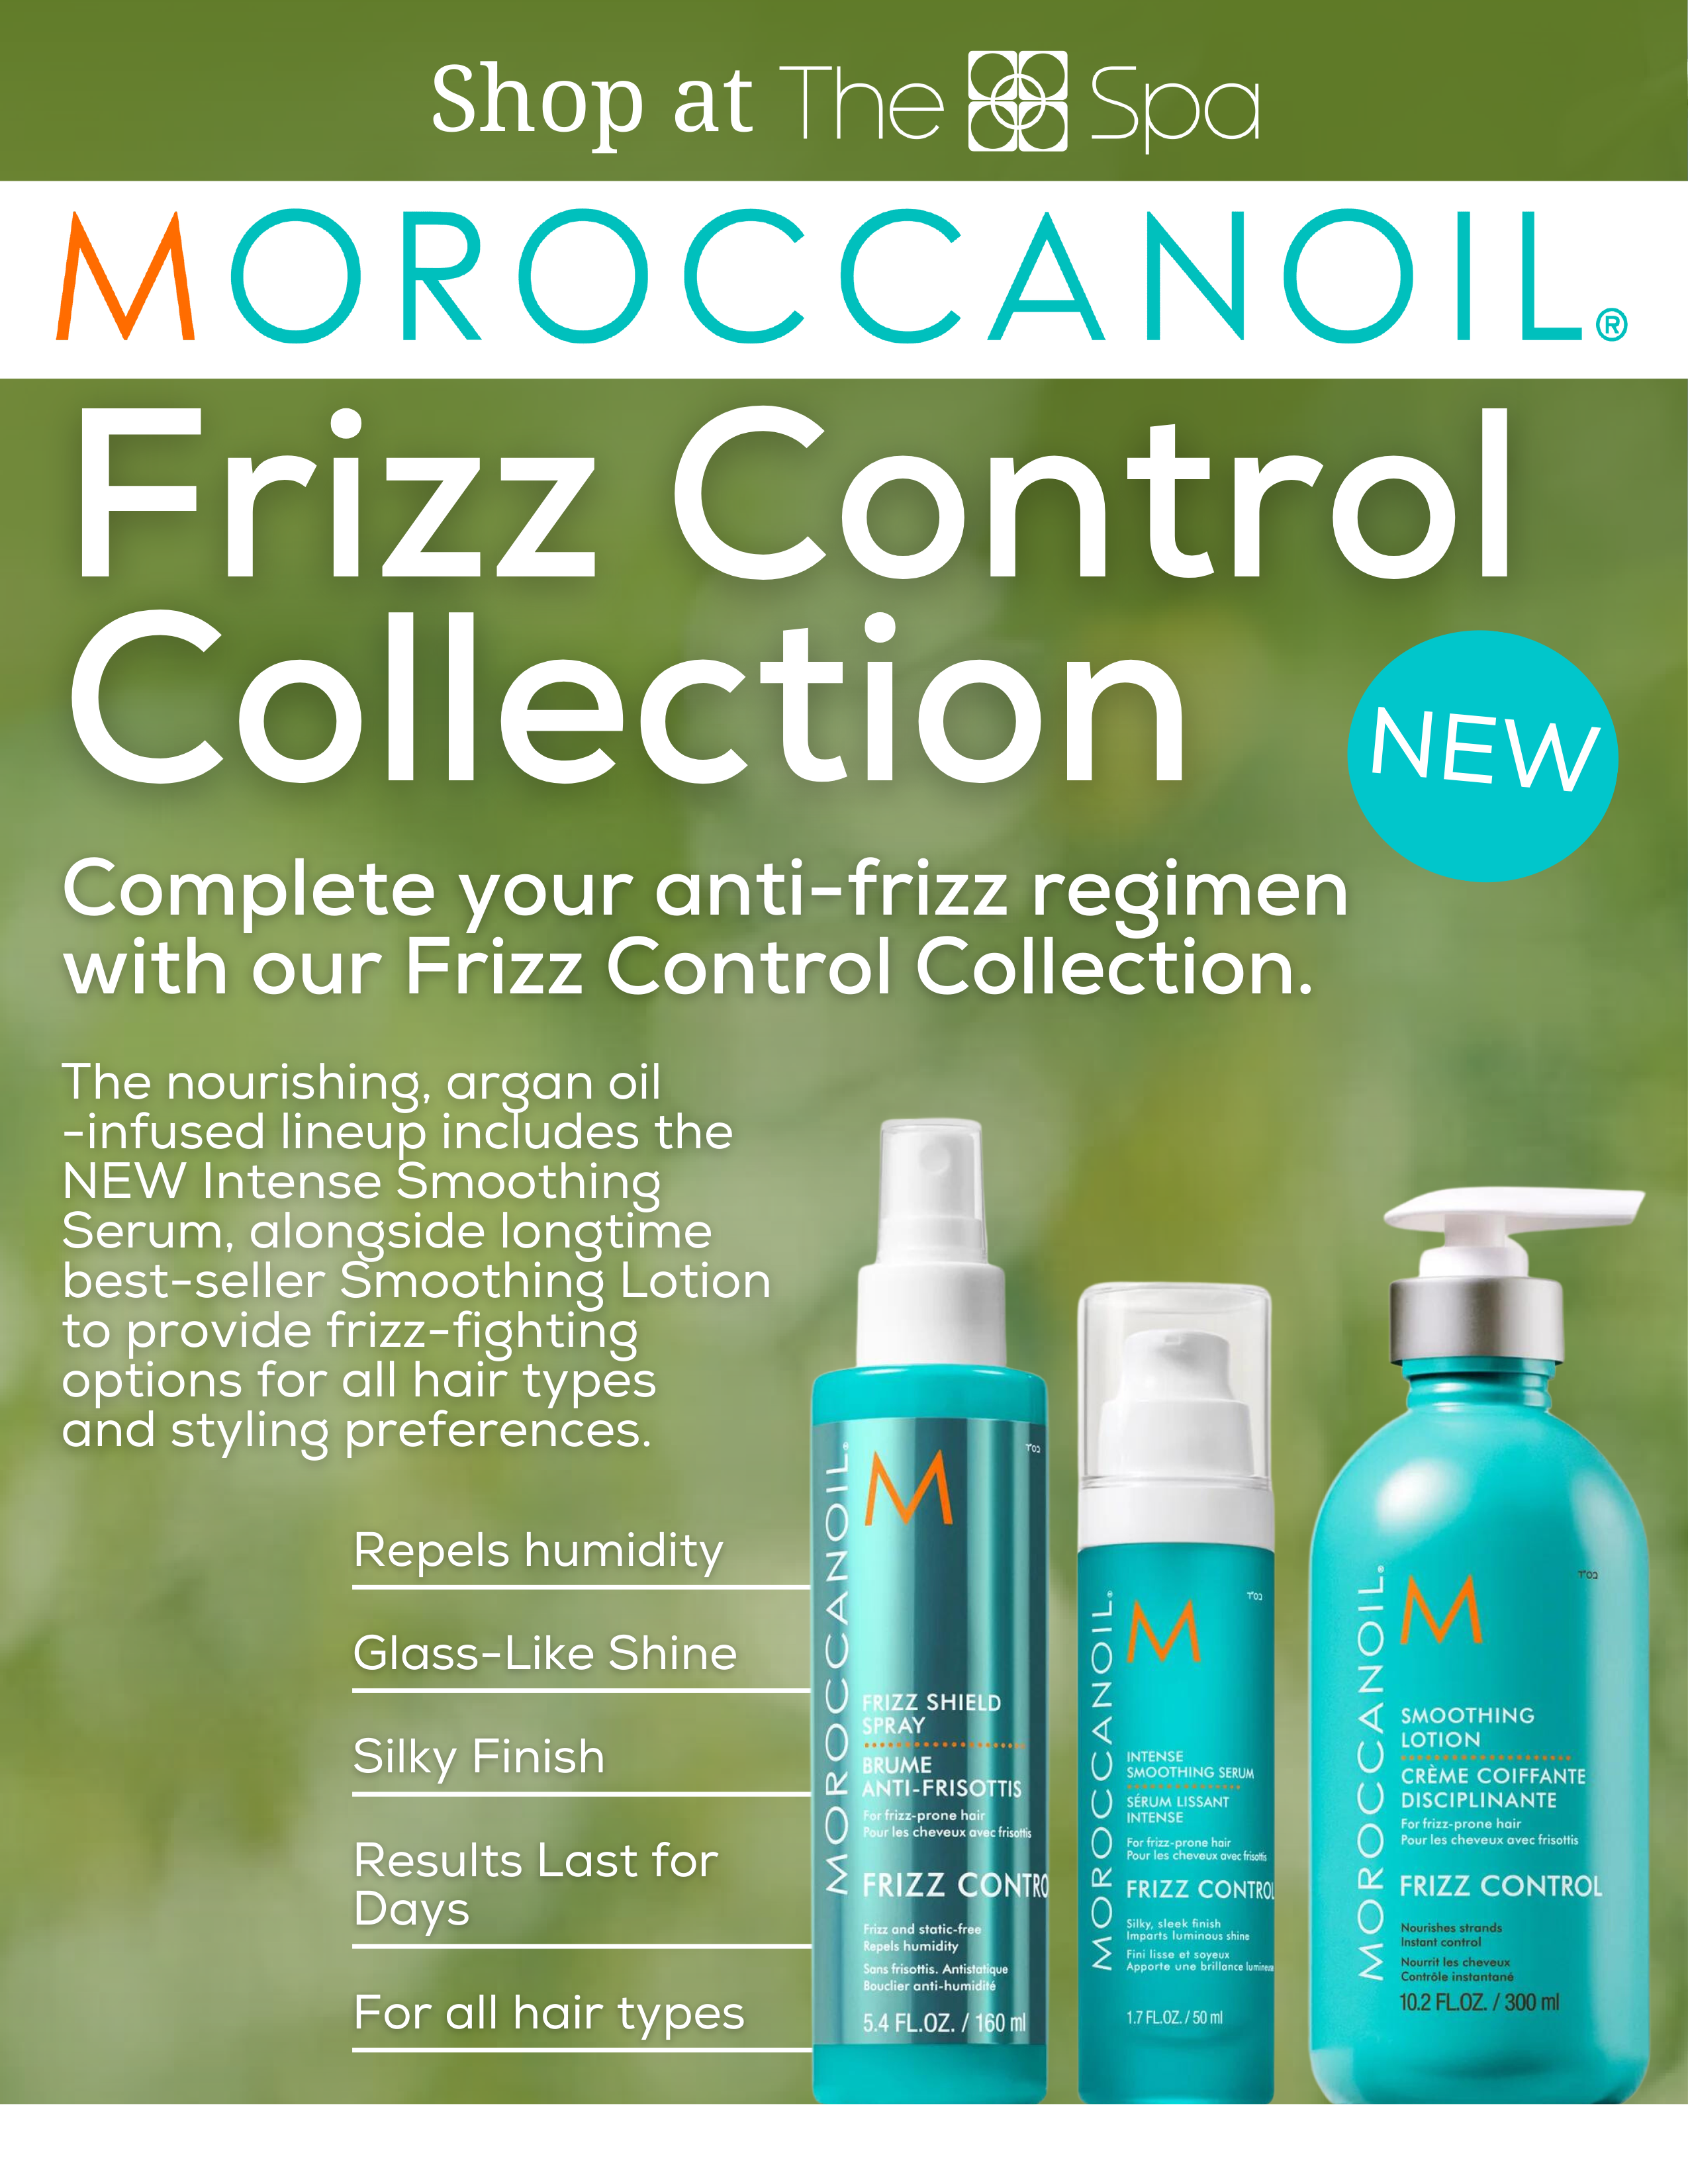 Wheaton Sport Center The Spa Moroccanoil Frizz Control Collection now available for sale!